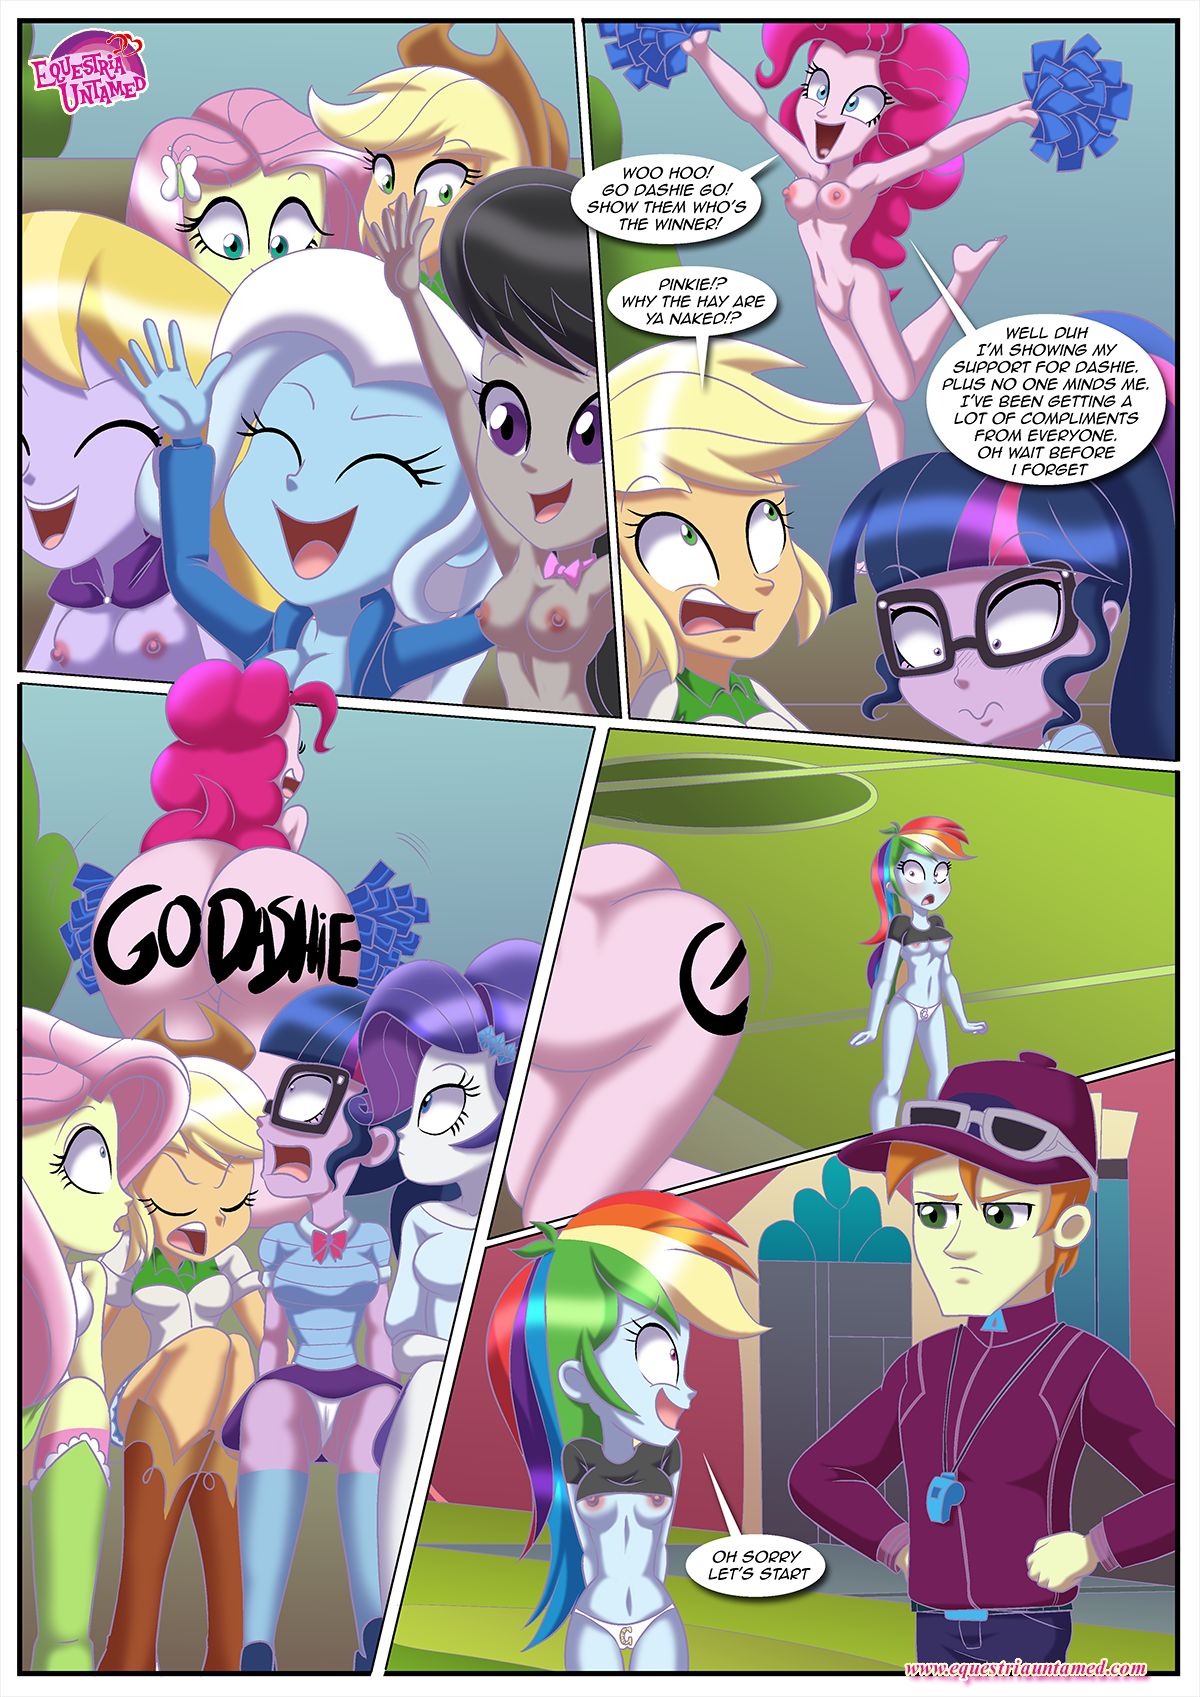 Sex Reeducation - My Little Pony: Friendship is Magic by Palcomix -  TeenSpiritHentai